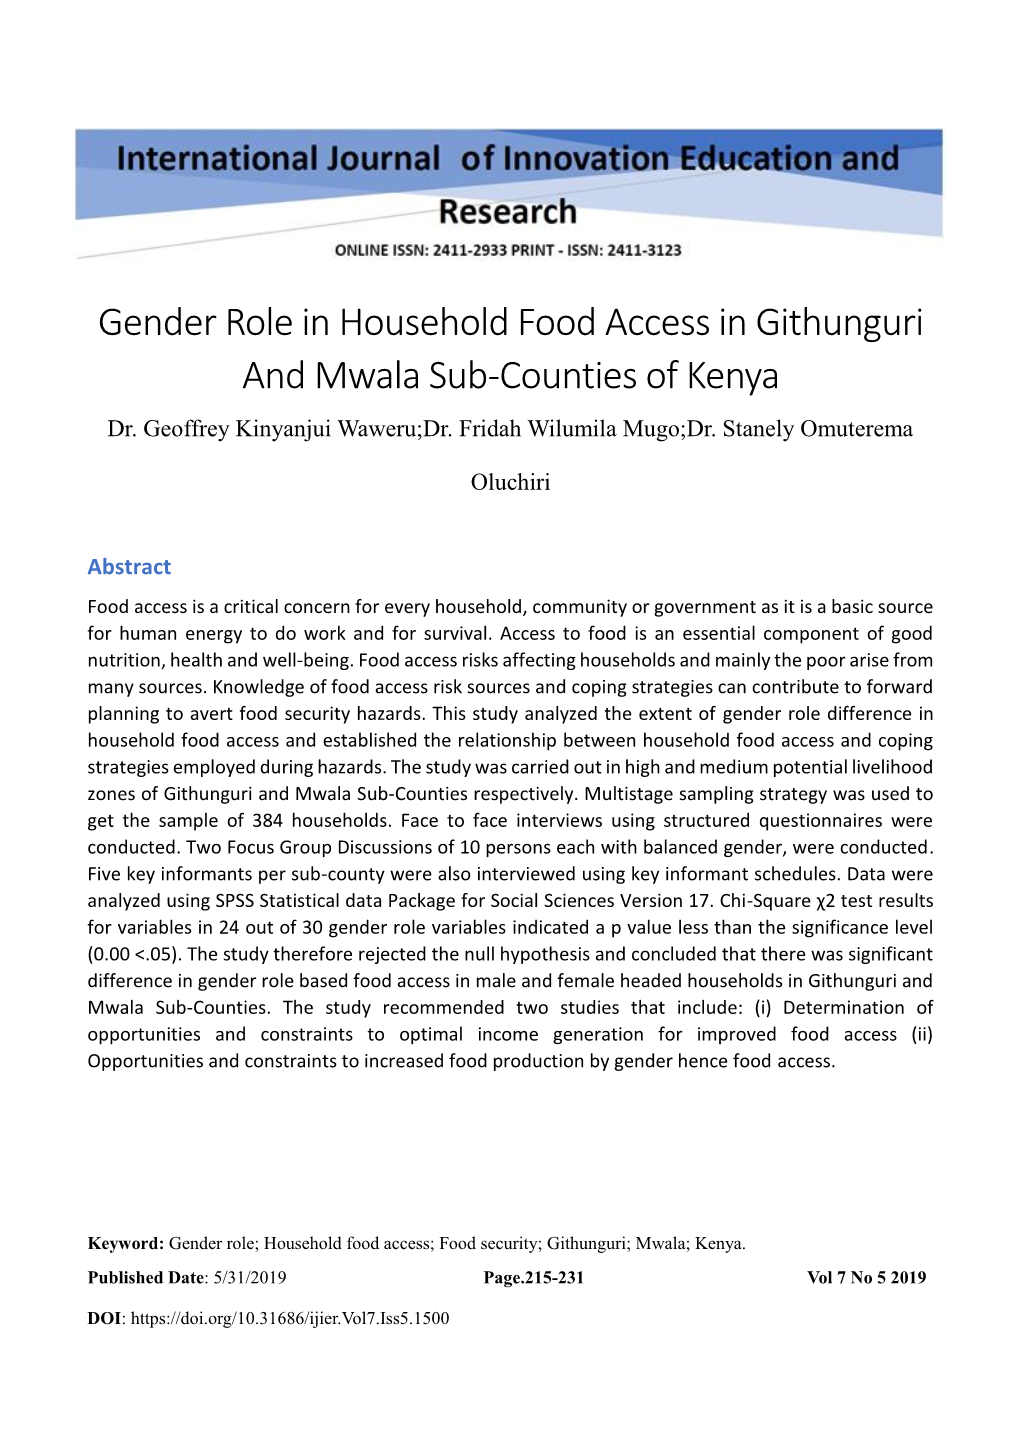 Gender Role in Household Food Access in Githunguri and Mwala Sub- Counties of Kenya